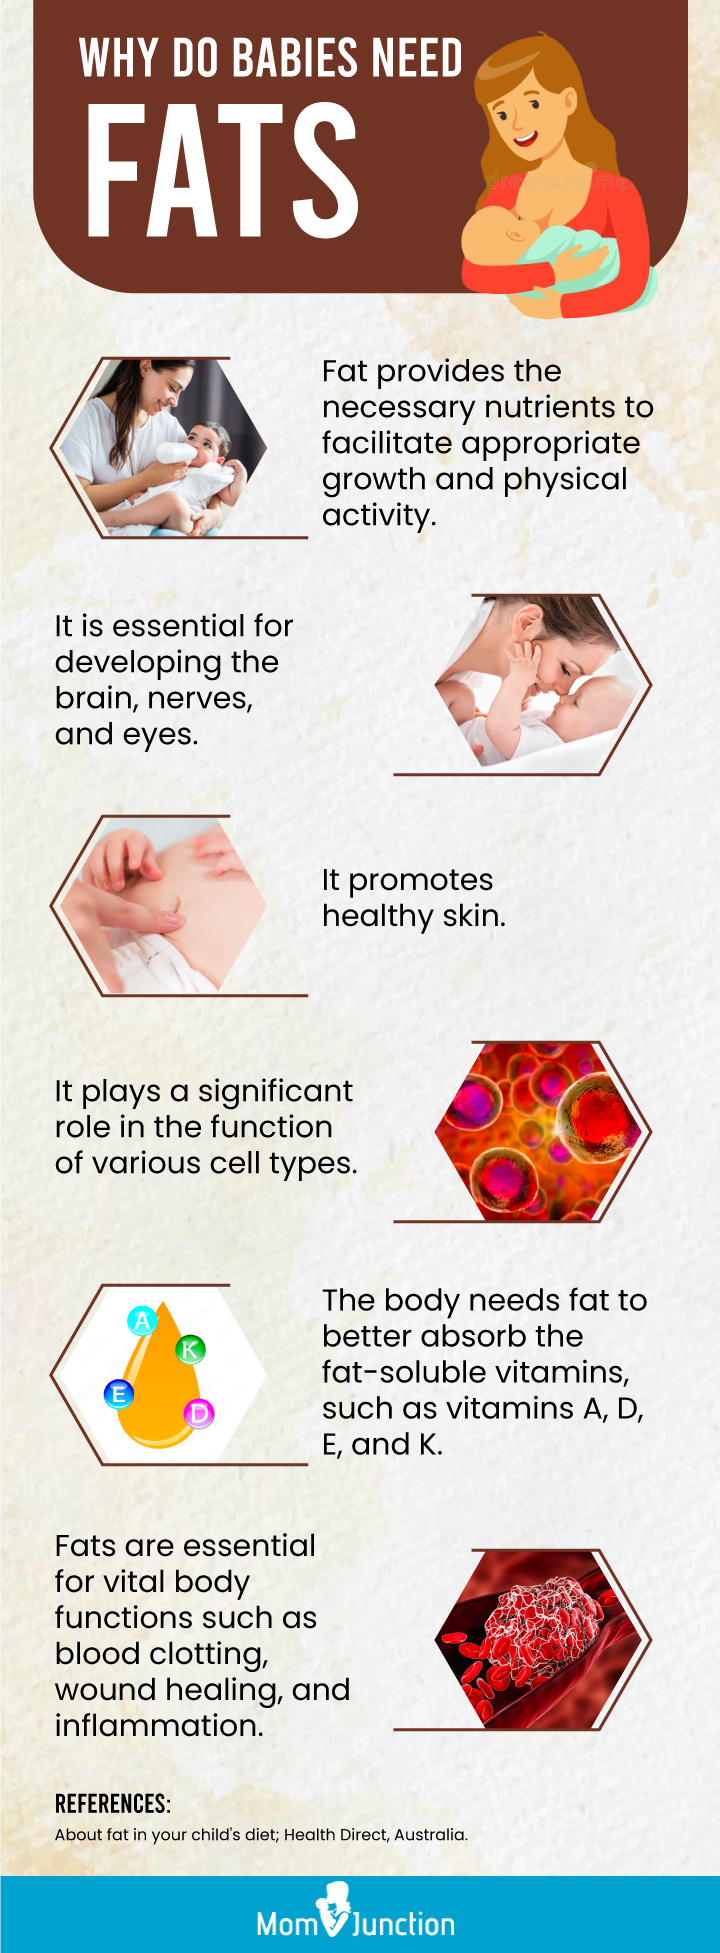 why do babies need fats [infographic]